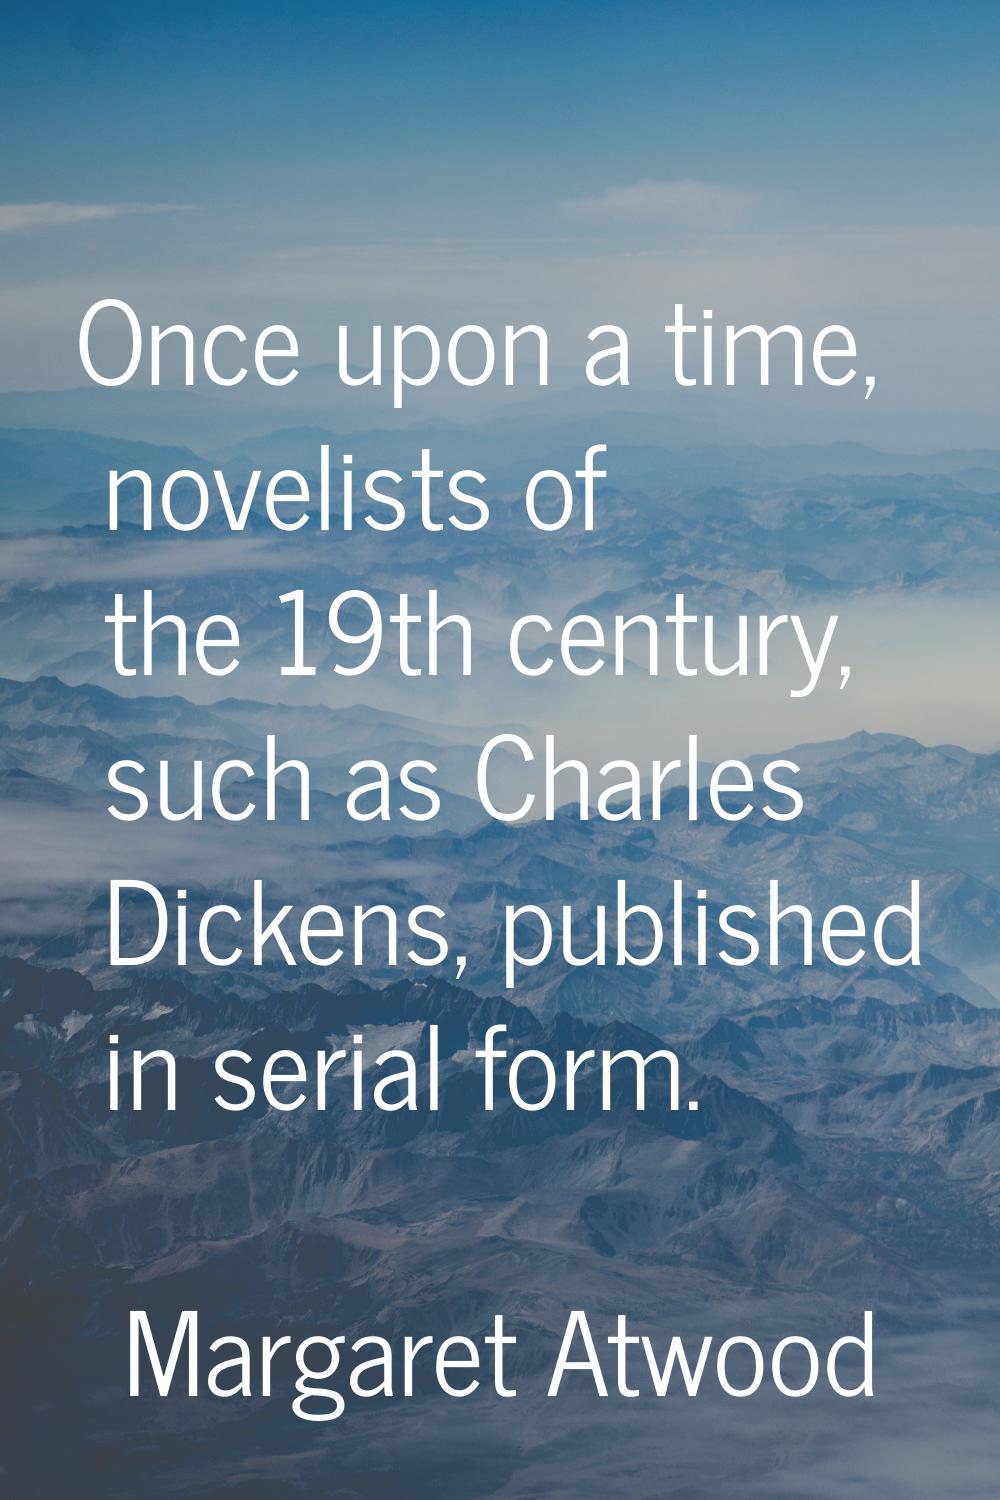 Once upon a time, novelists of the 19th century, such as Charles Dickens, published in serial form.